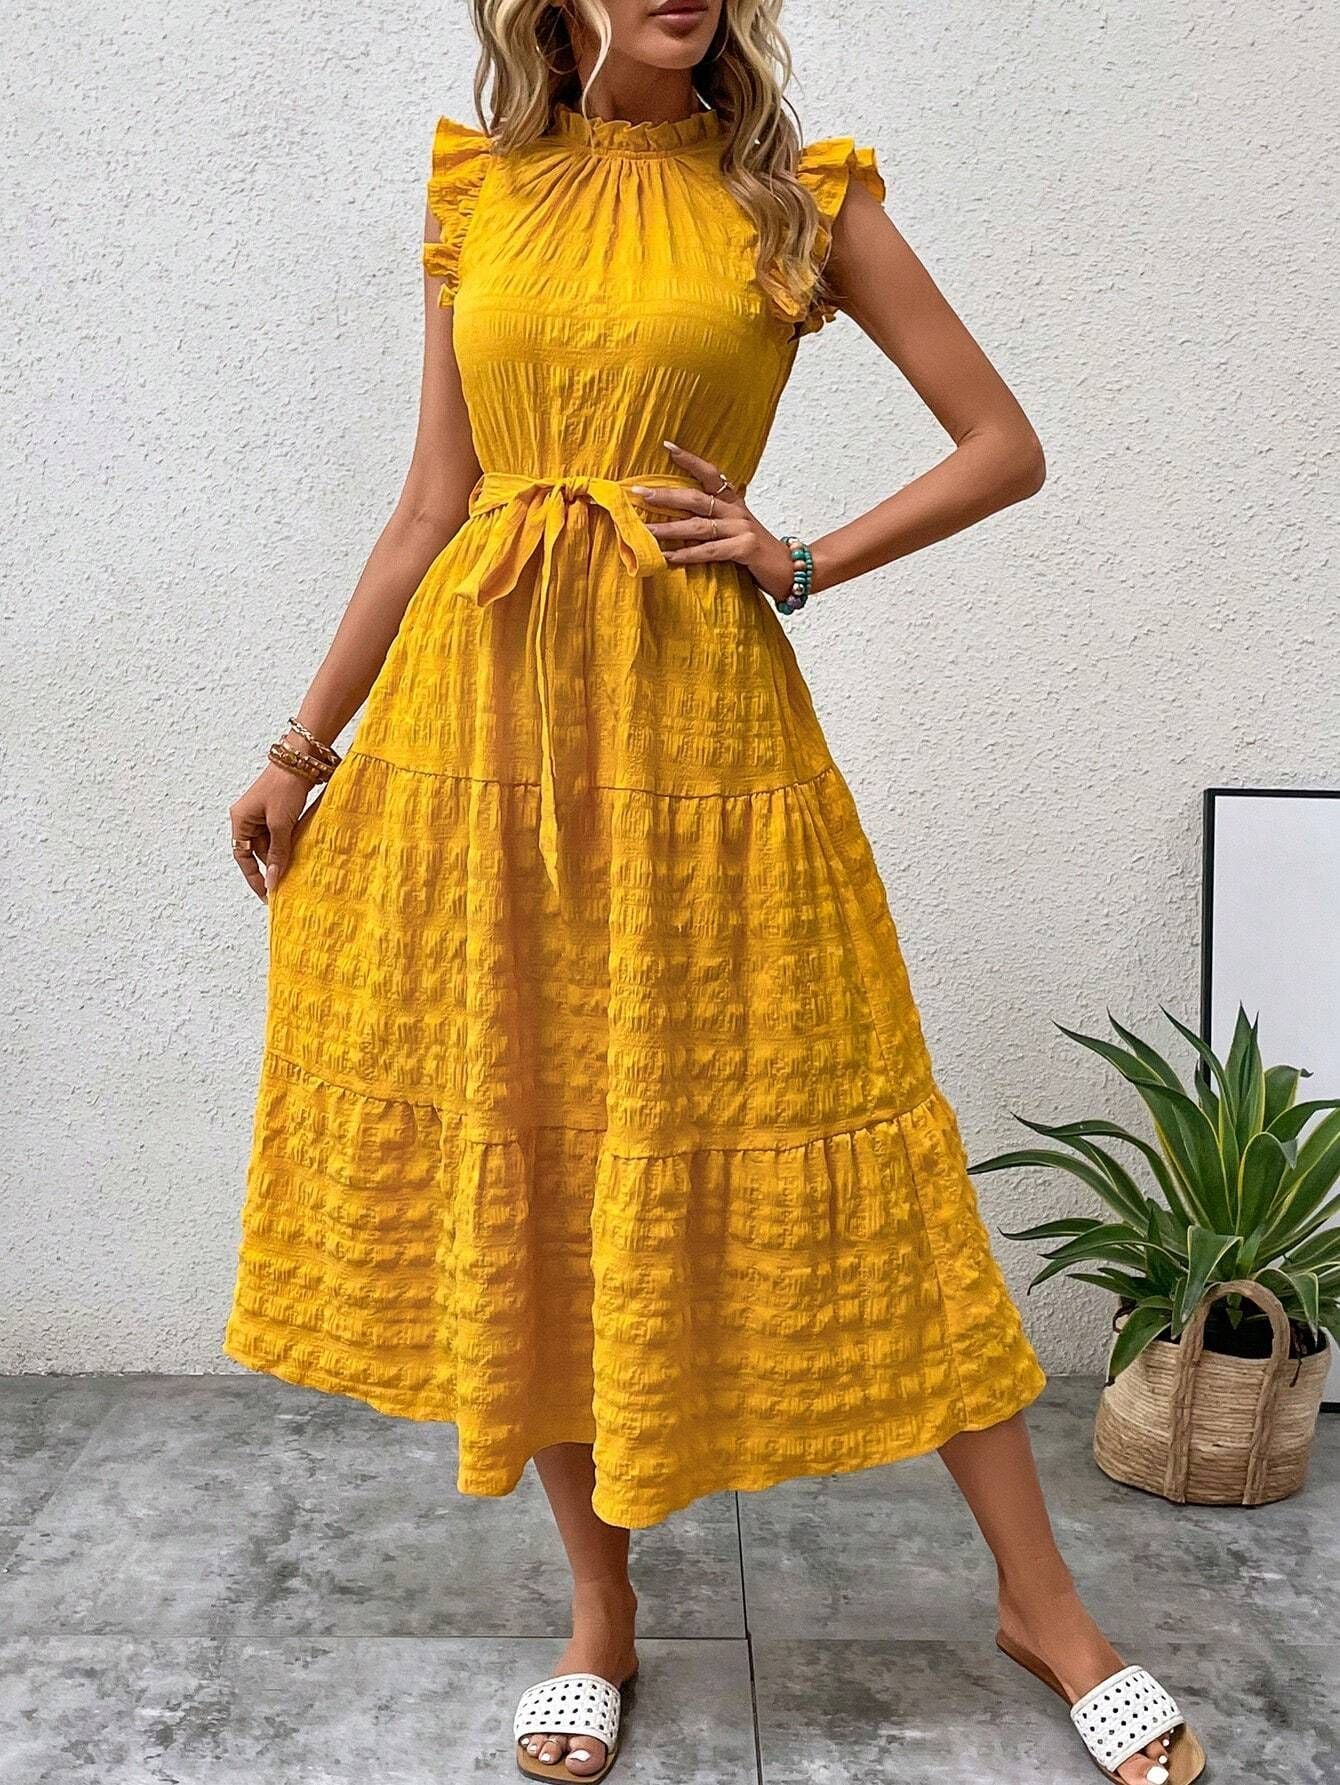 Summer lace-up dress